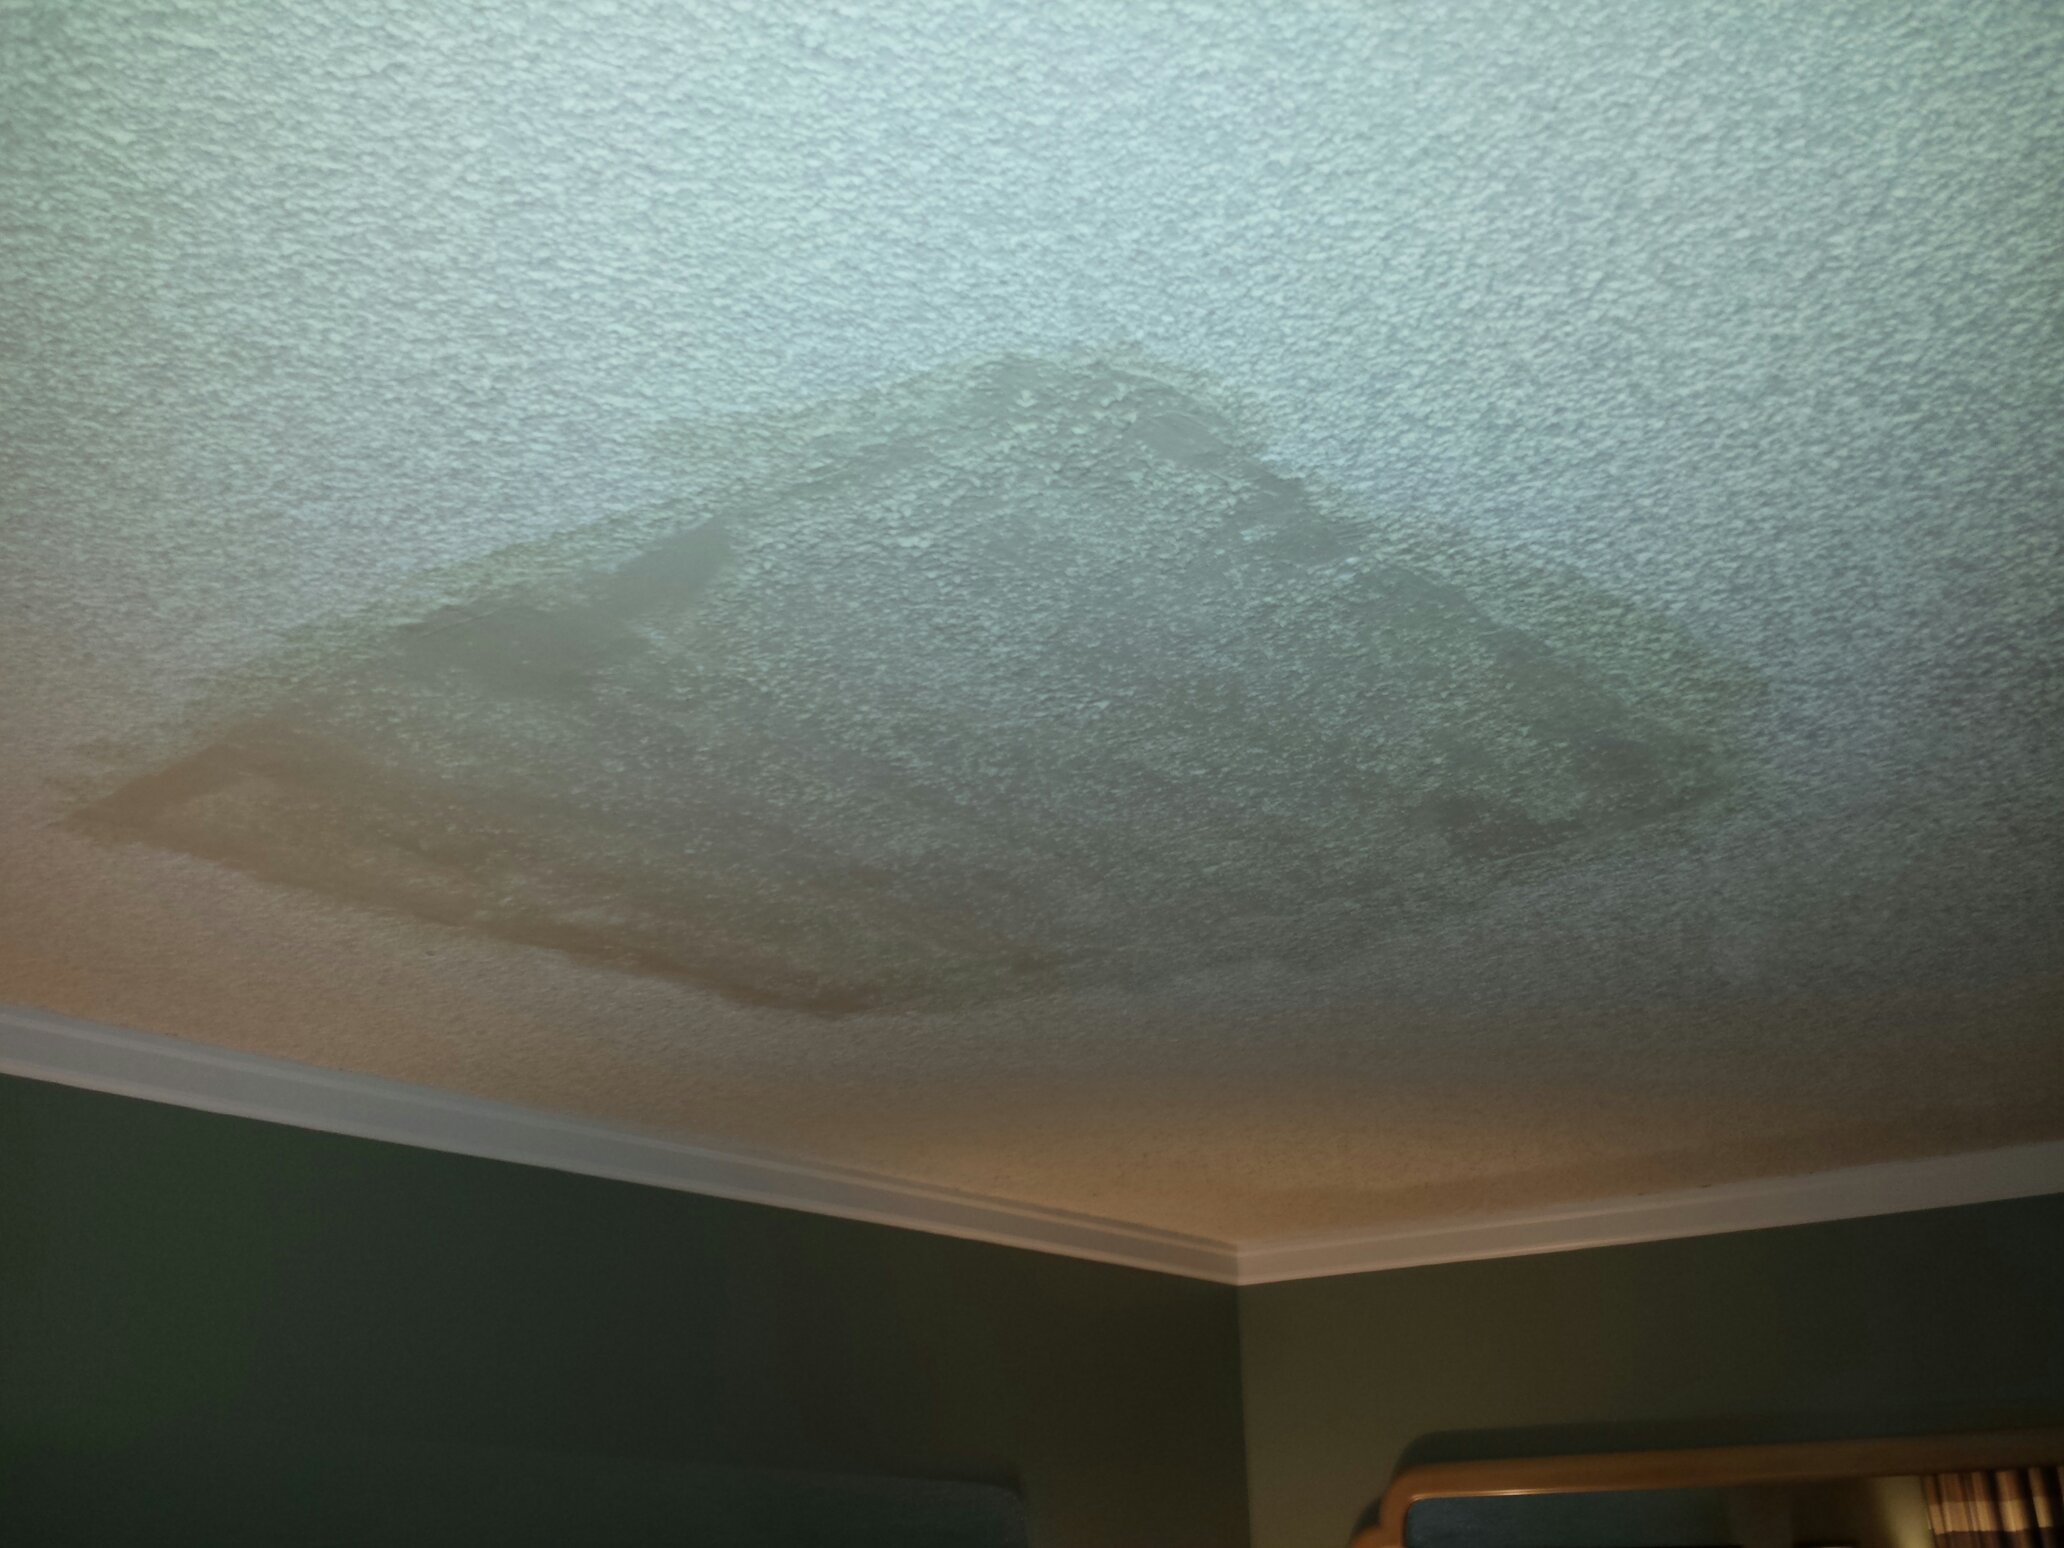 Patched Ceiling Days Inn